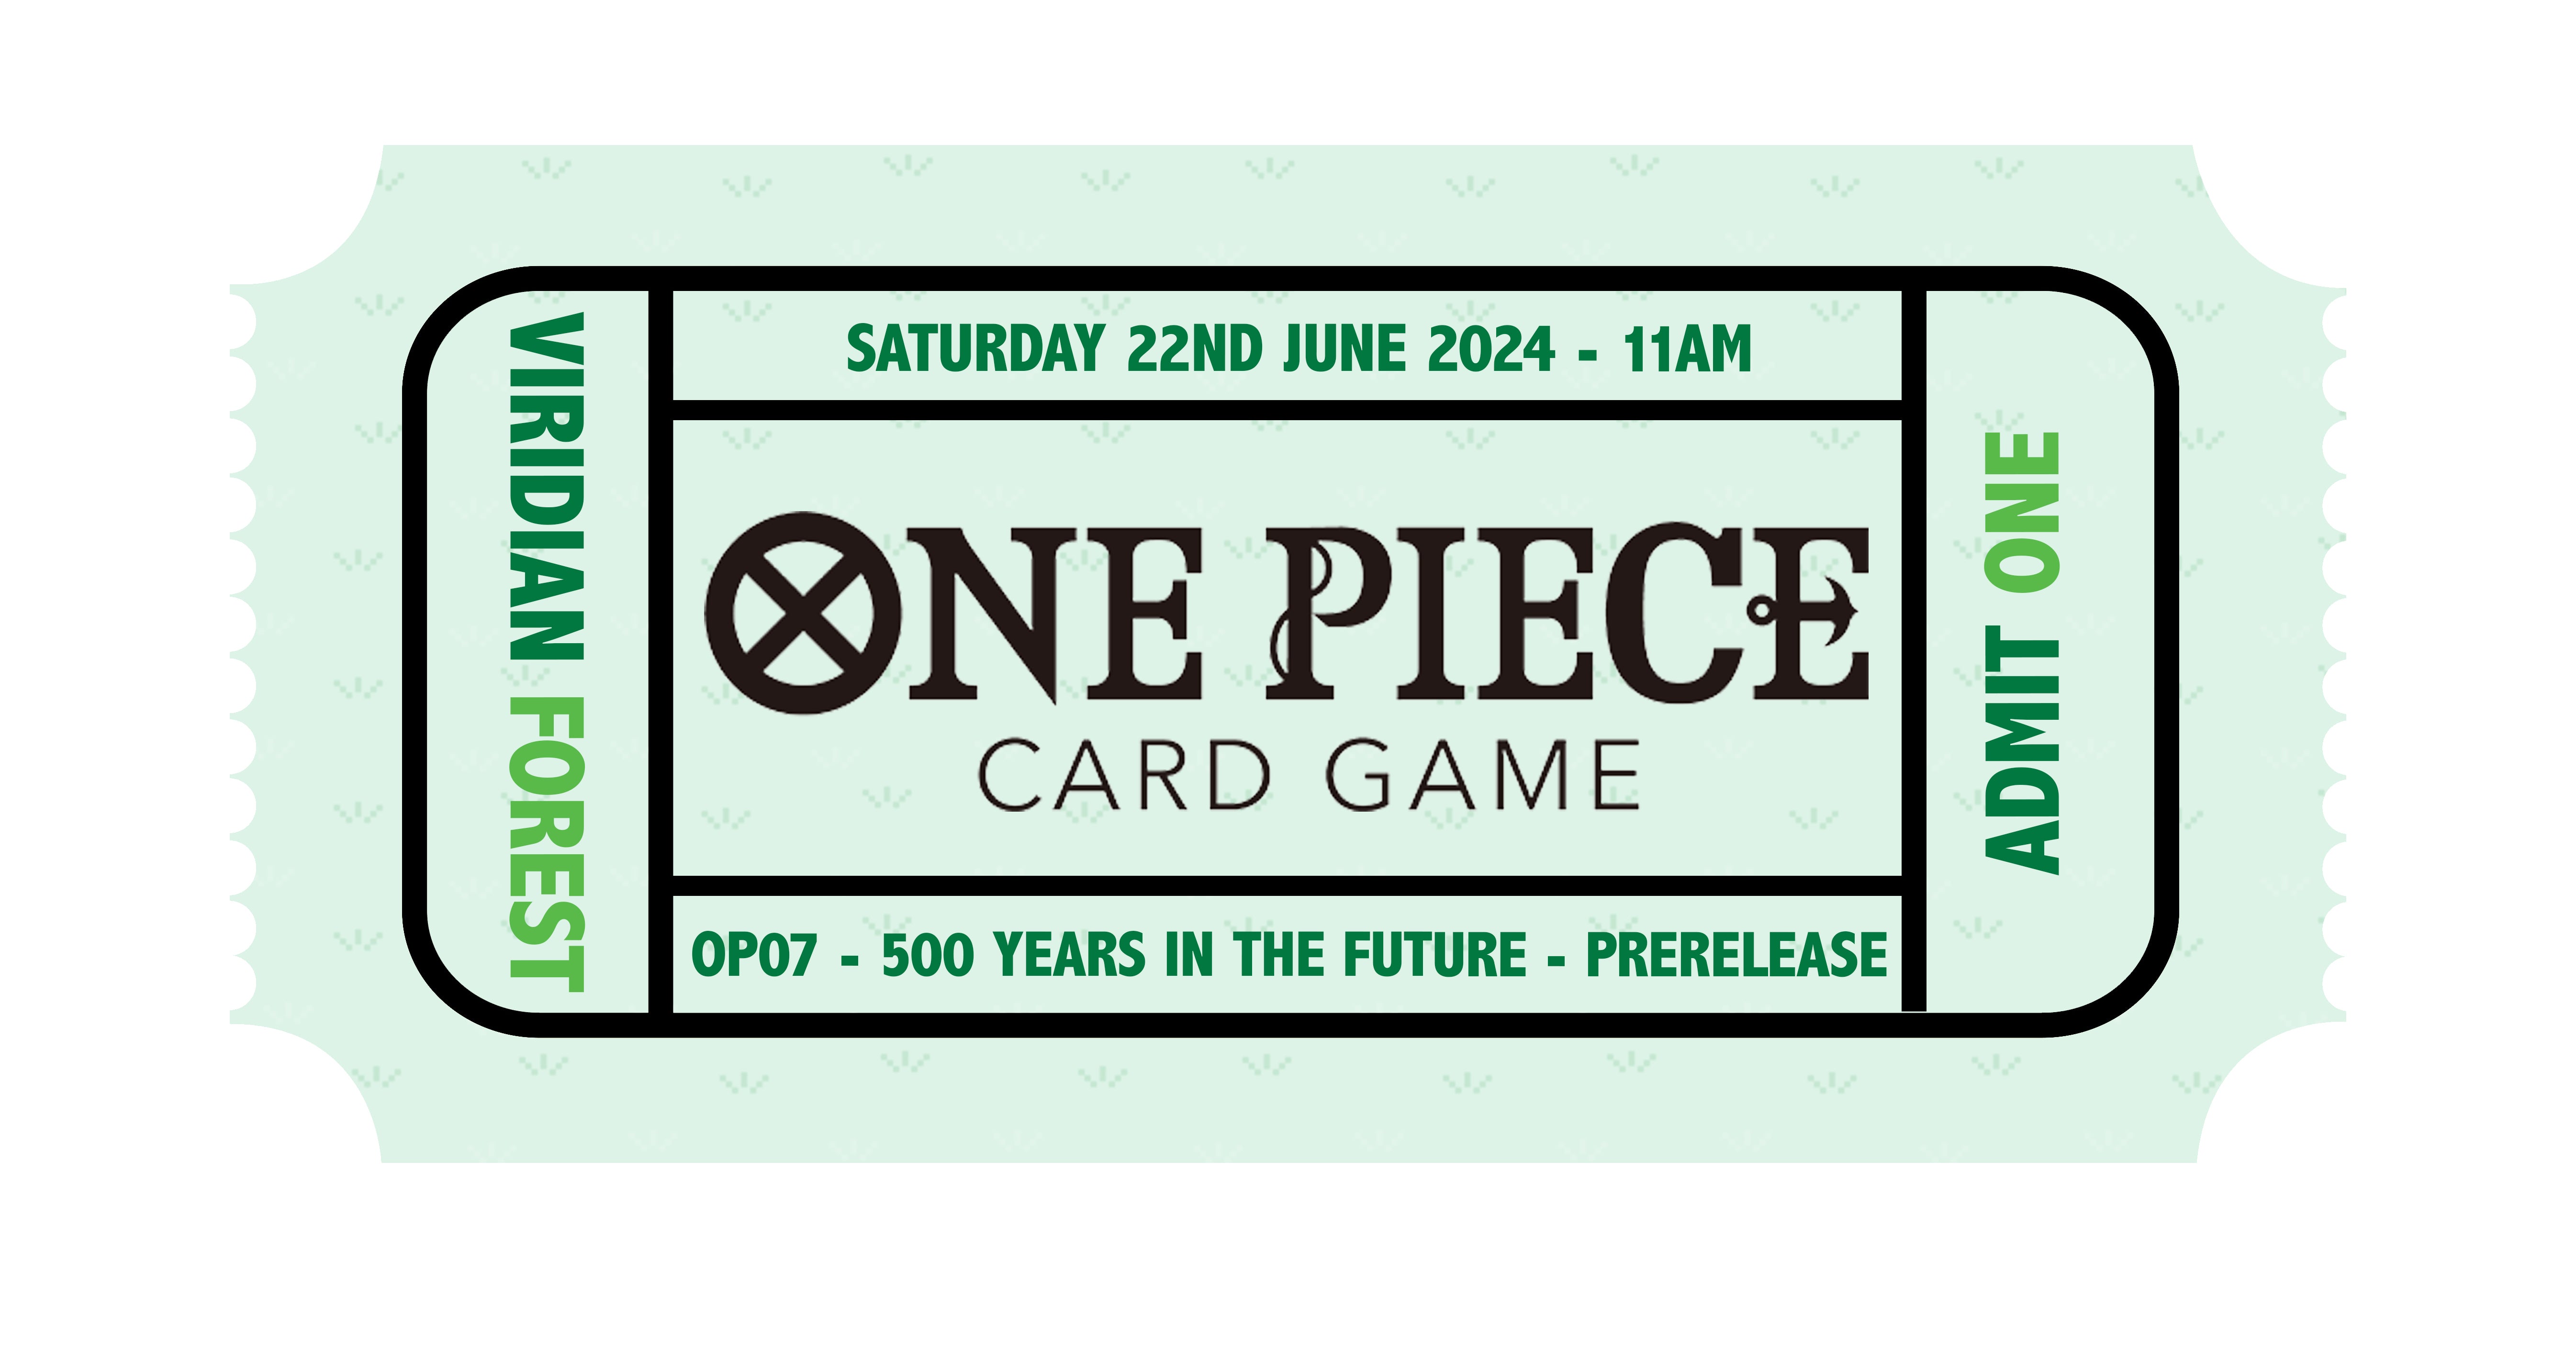 One Piece Card Game - OP07 - 500 Years in the Future - Morning Prerelease Tournament | Viridian Forest